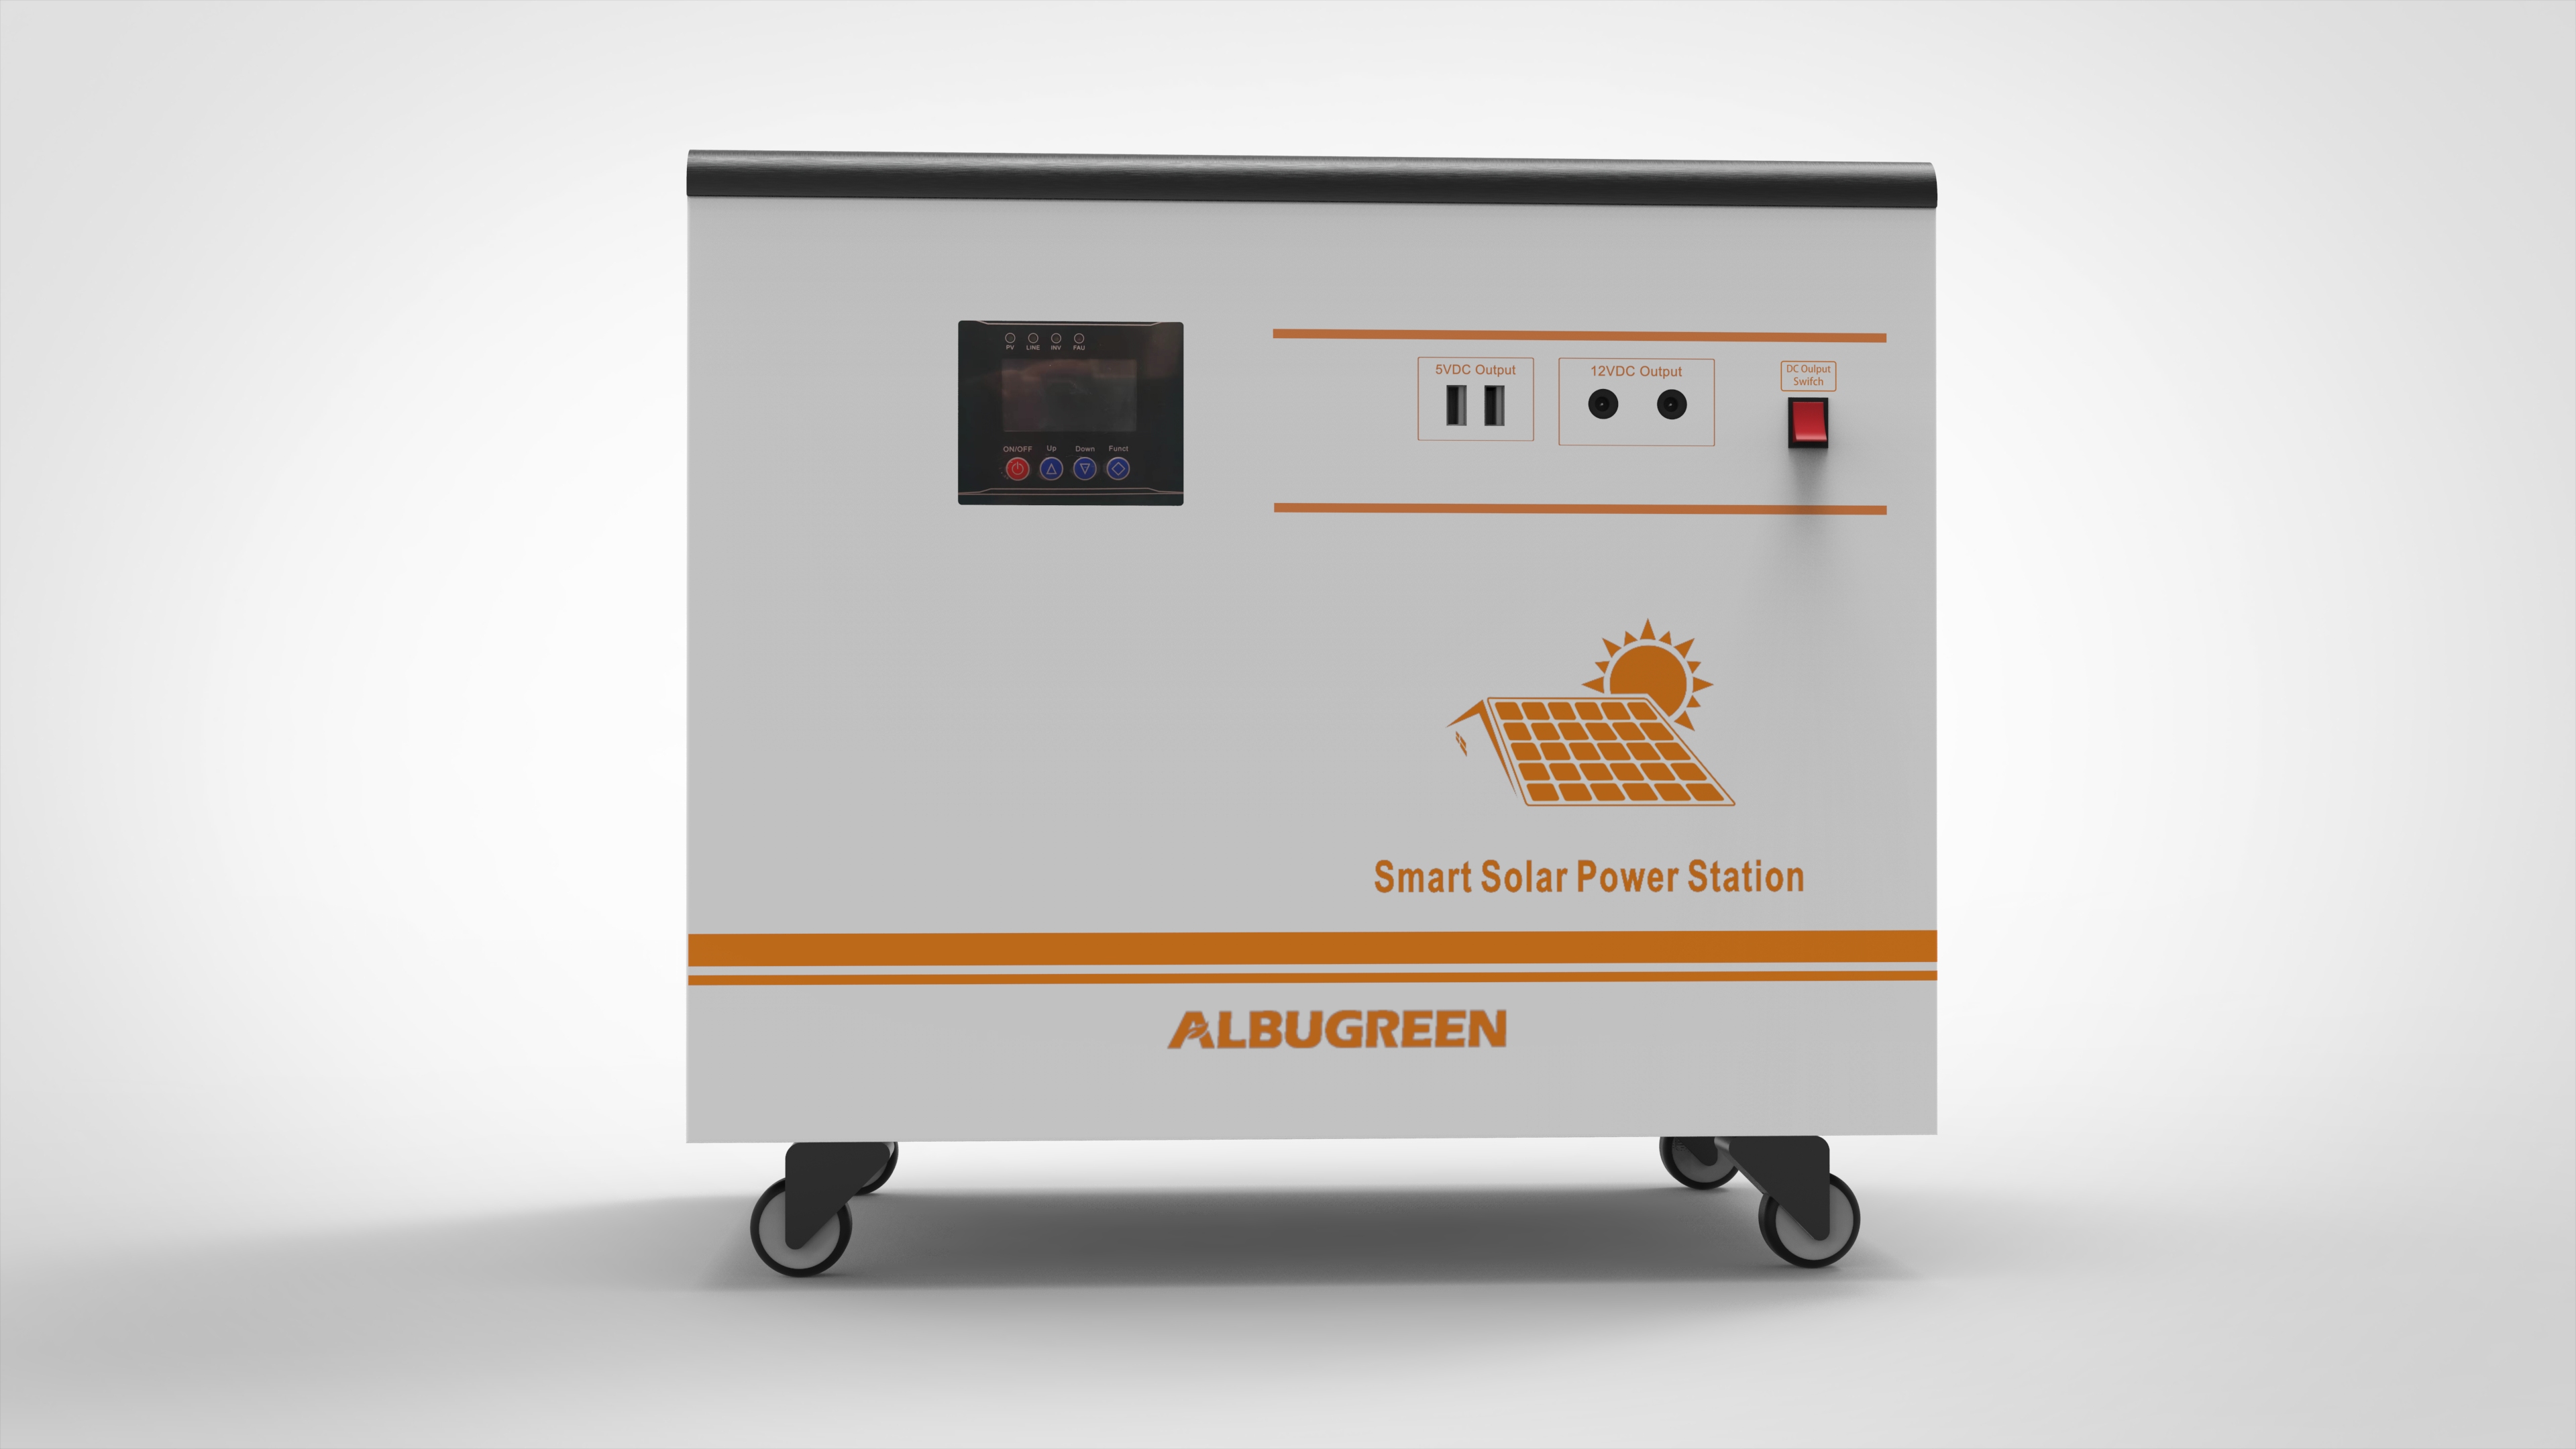 5000W 220V High Capacity in One Solar Power System for The Home